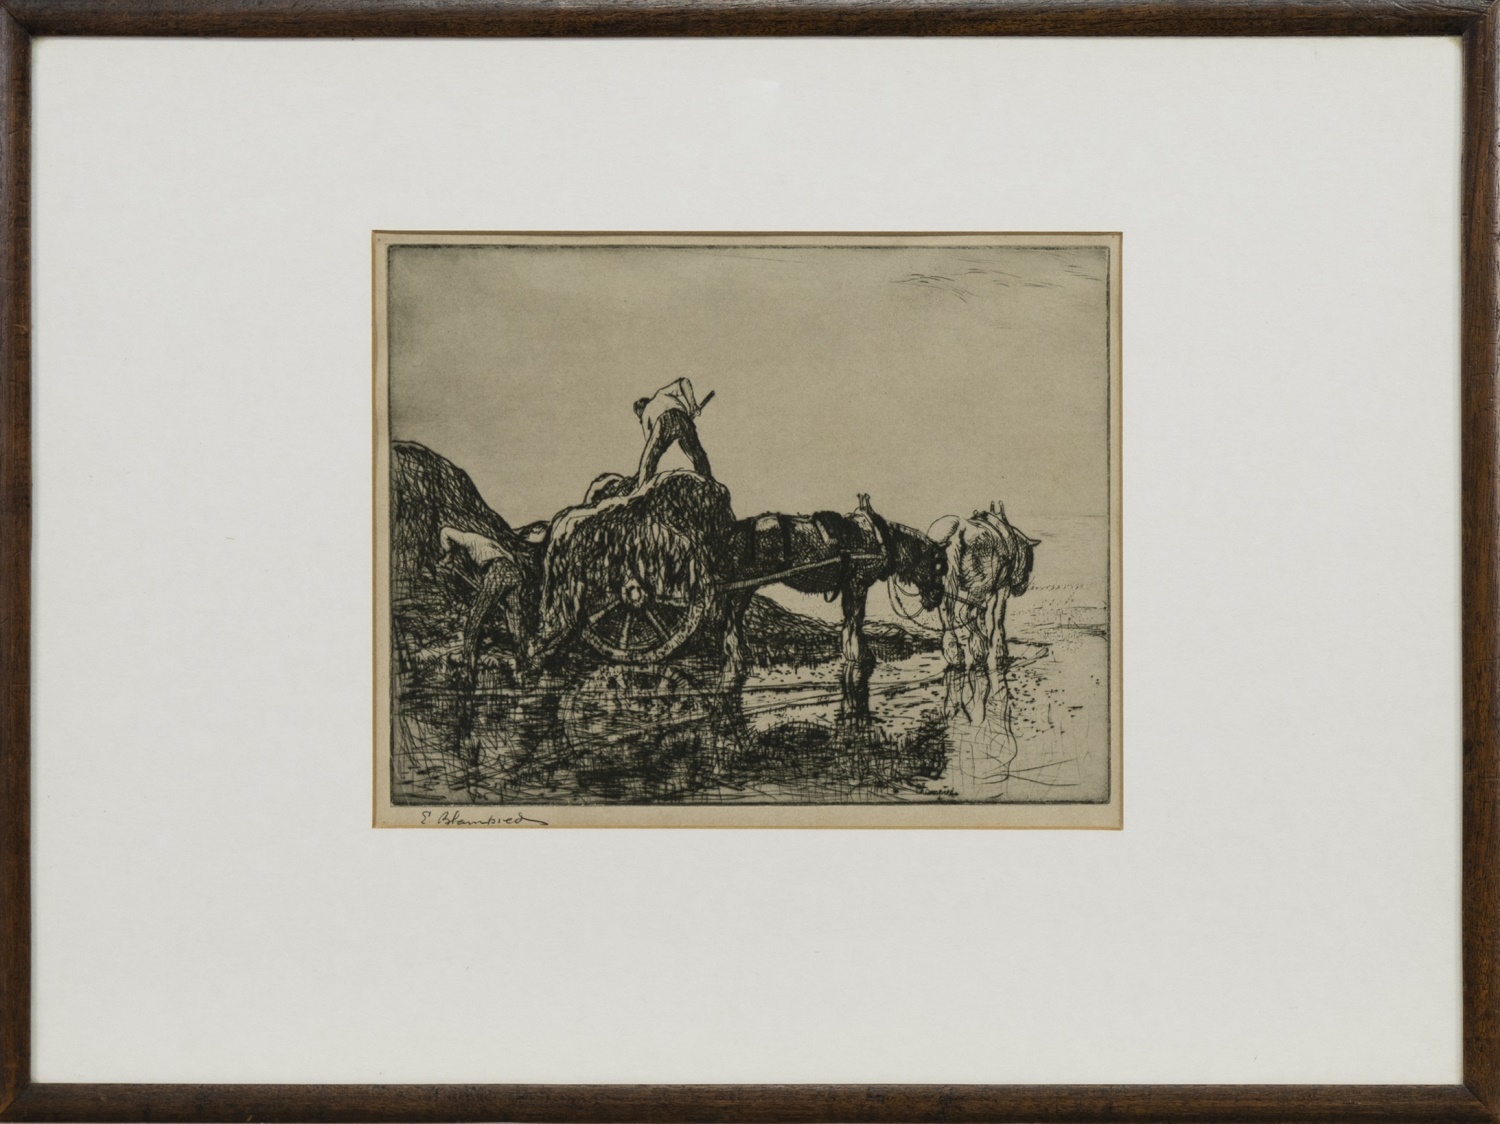 THE 'VRAIC' FARMERS, A DRYPOINT ETCHING BY EDMUND BLAMPIED